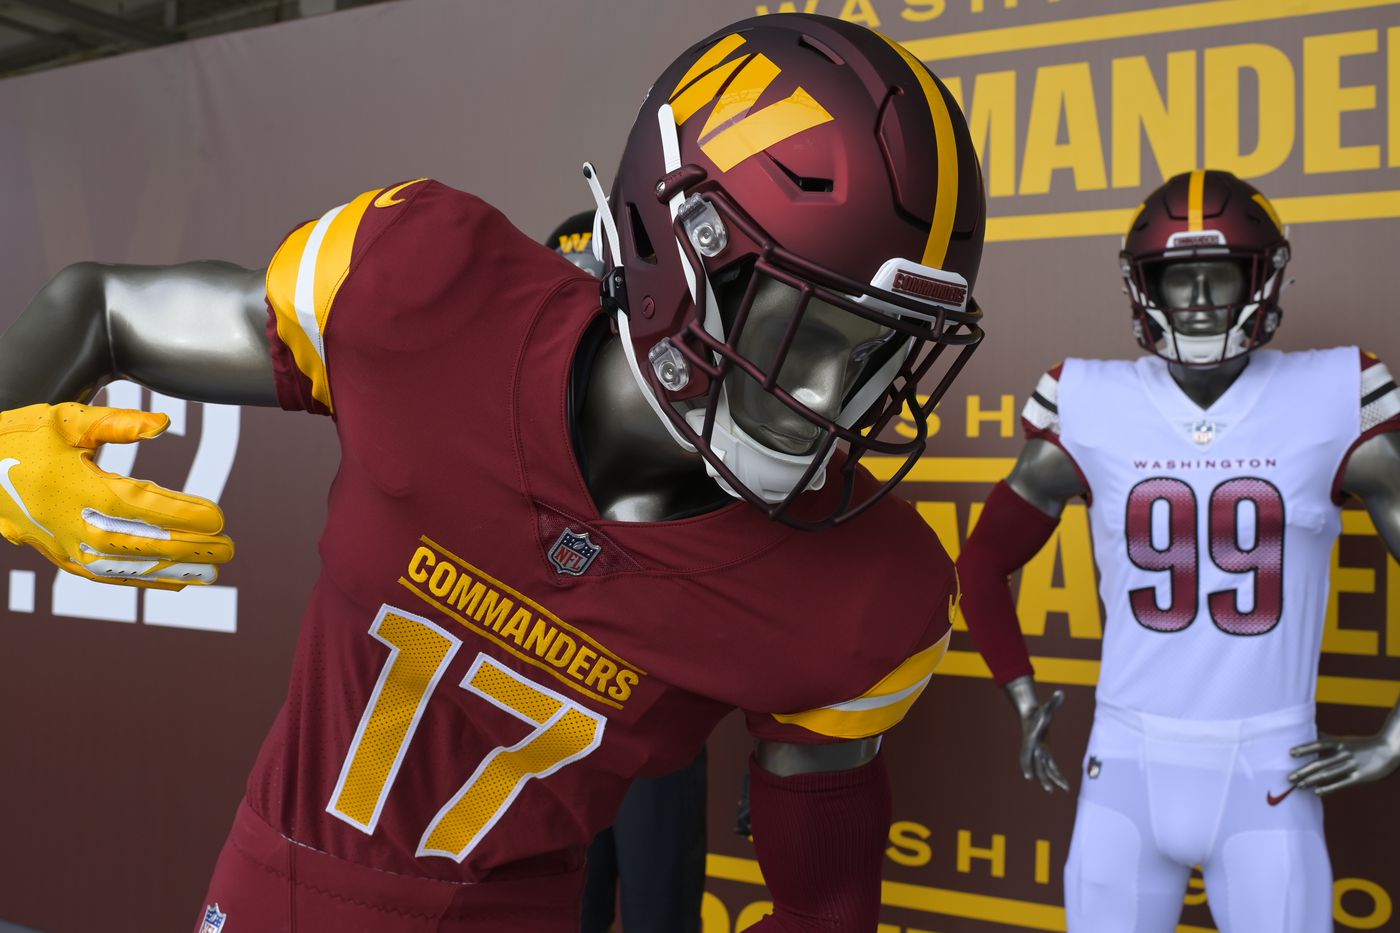 The Washington Commanders release their home jersey schedule - Hogs Haven